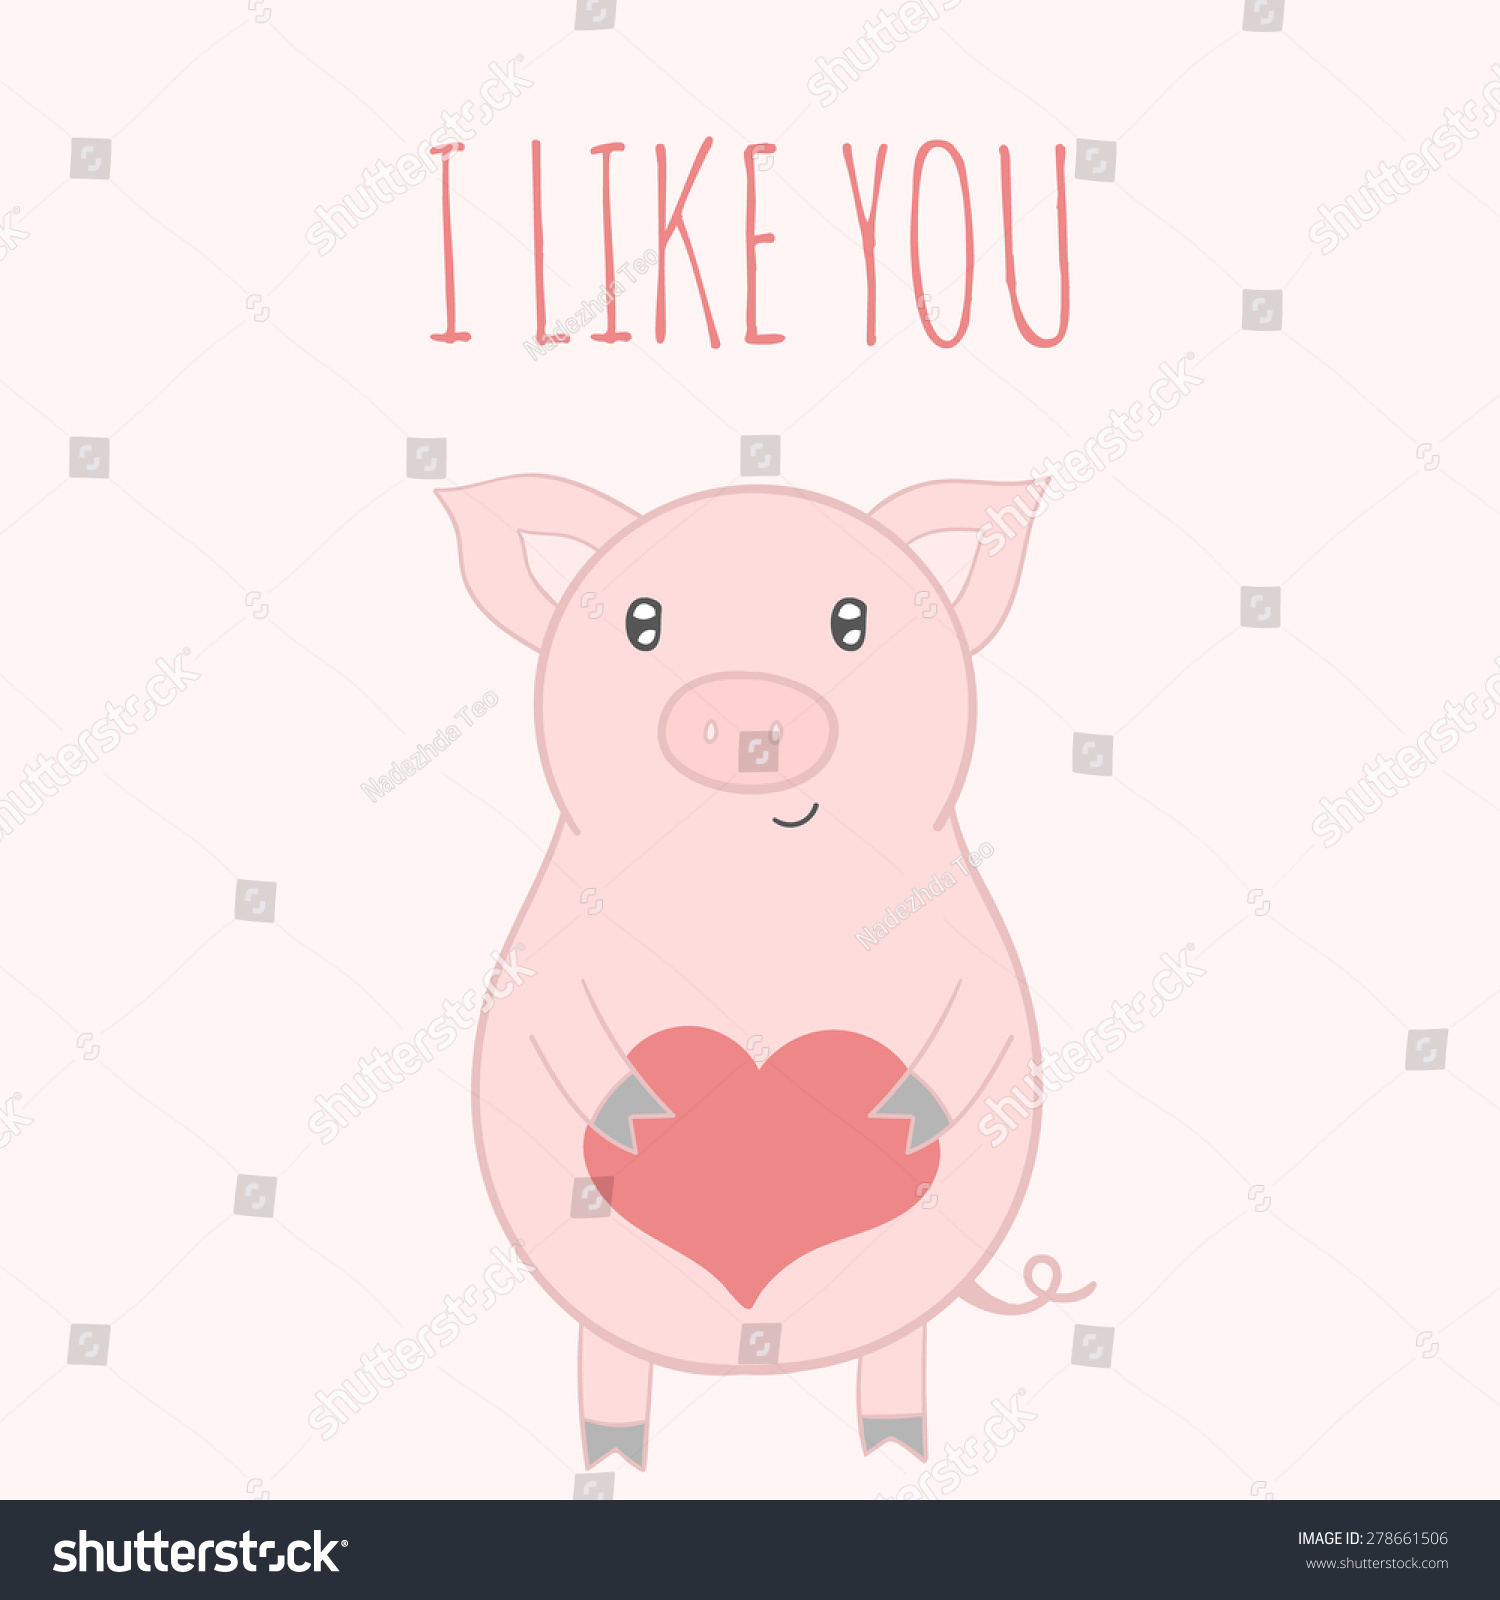 Inspirational romantic and love quote card Cute hand drawn pig with text Vector Doodle